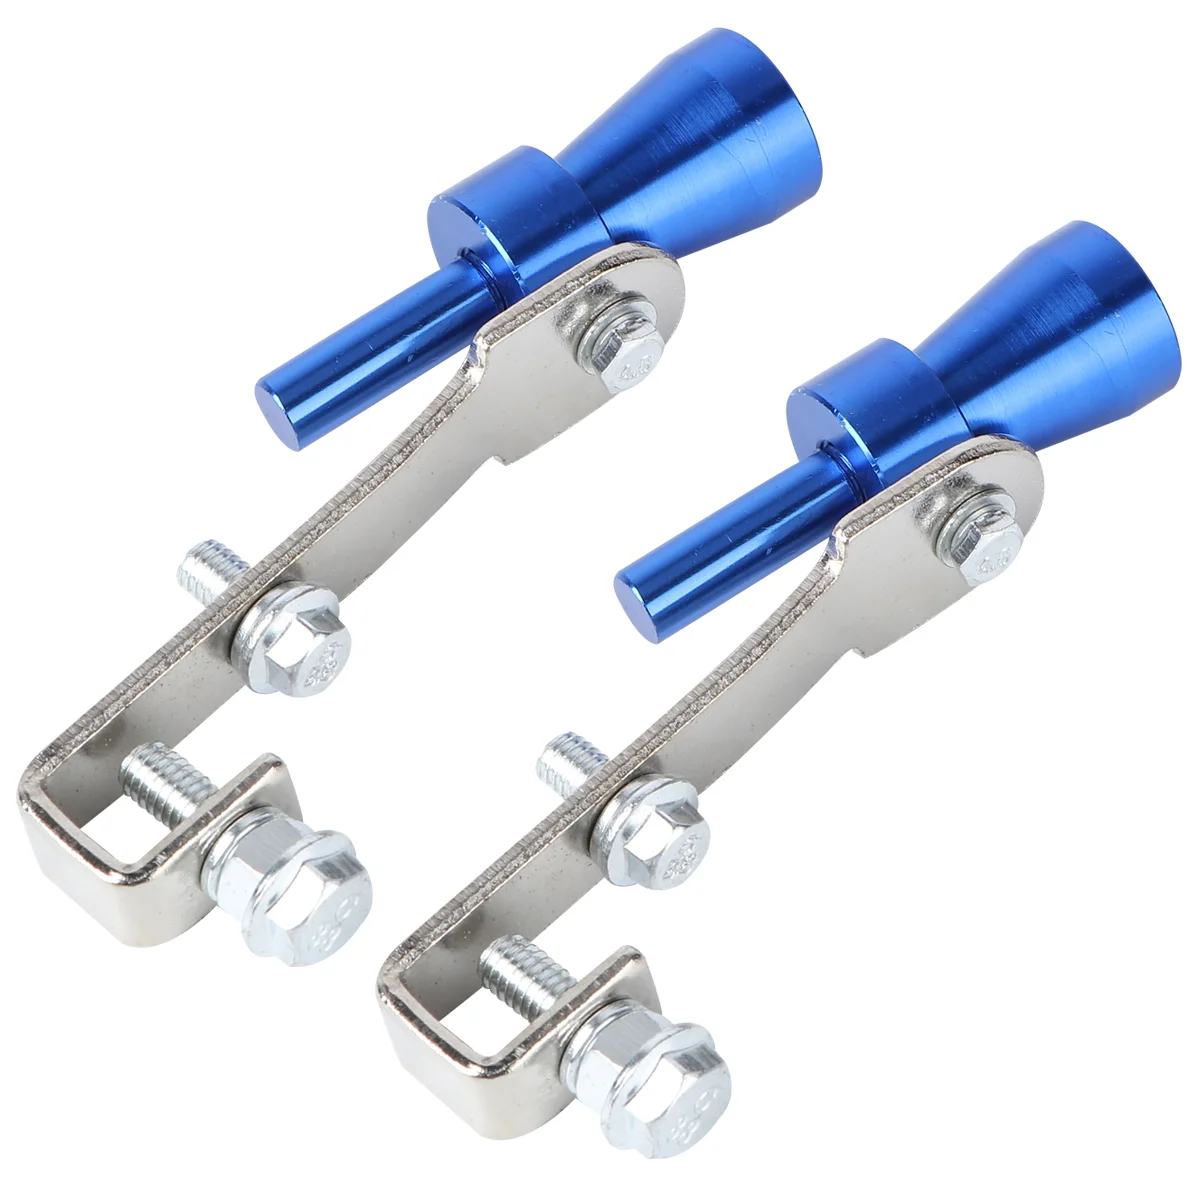 

2pcs Sound Whistle Car Exhaust Pipe Aluminum Motorbike Blow Off Sound Maker Modified Tail Whistle ( Blue )